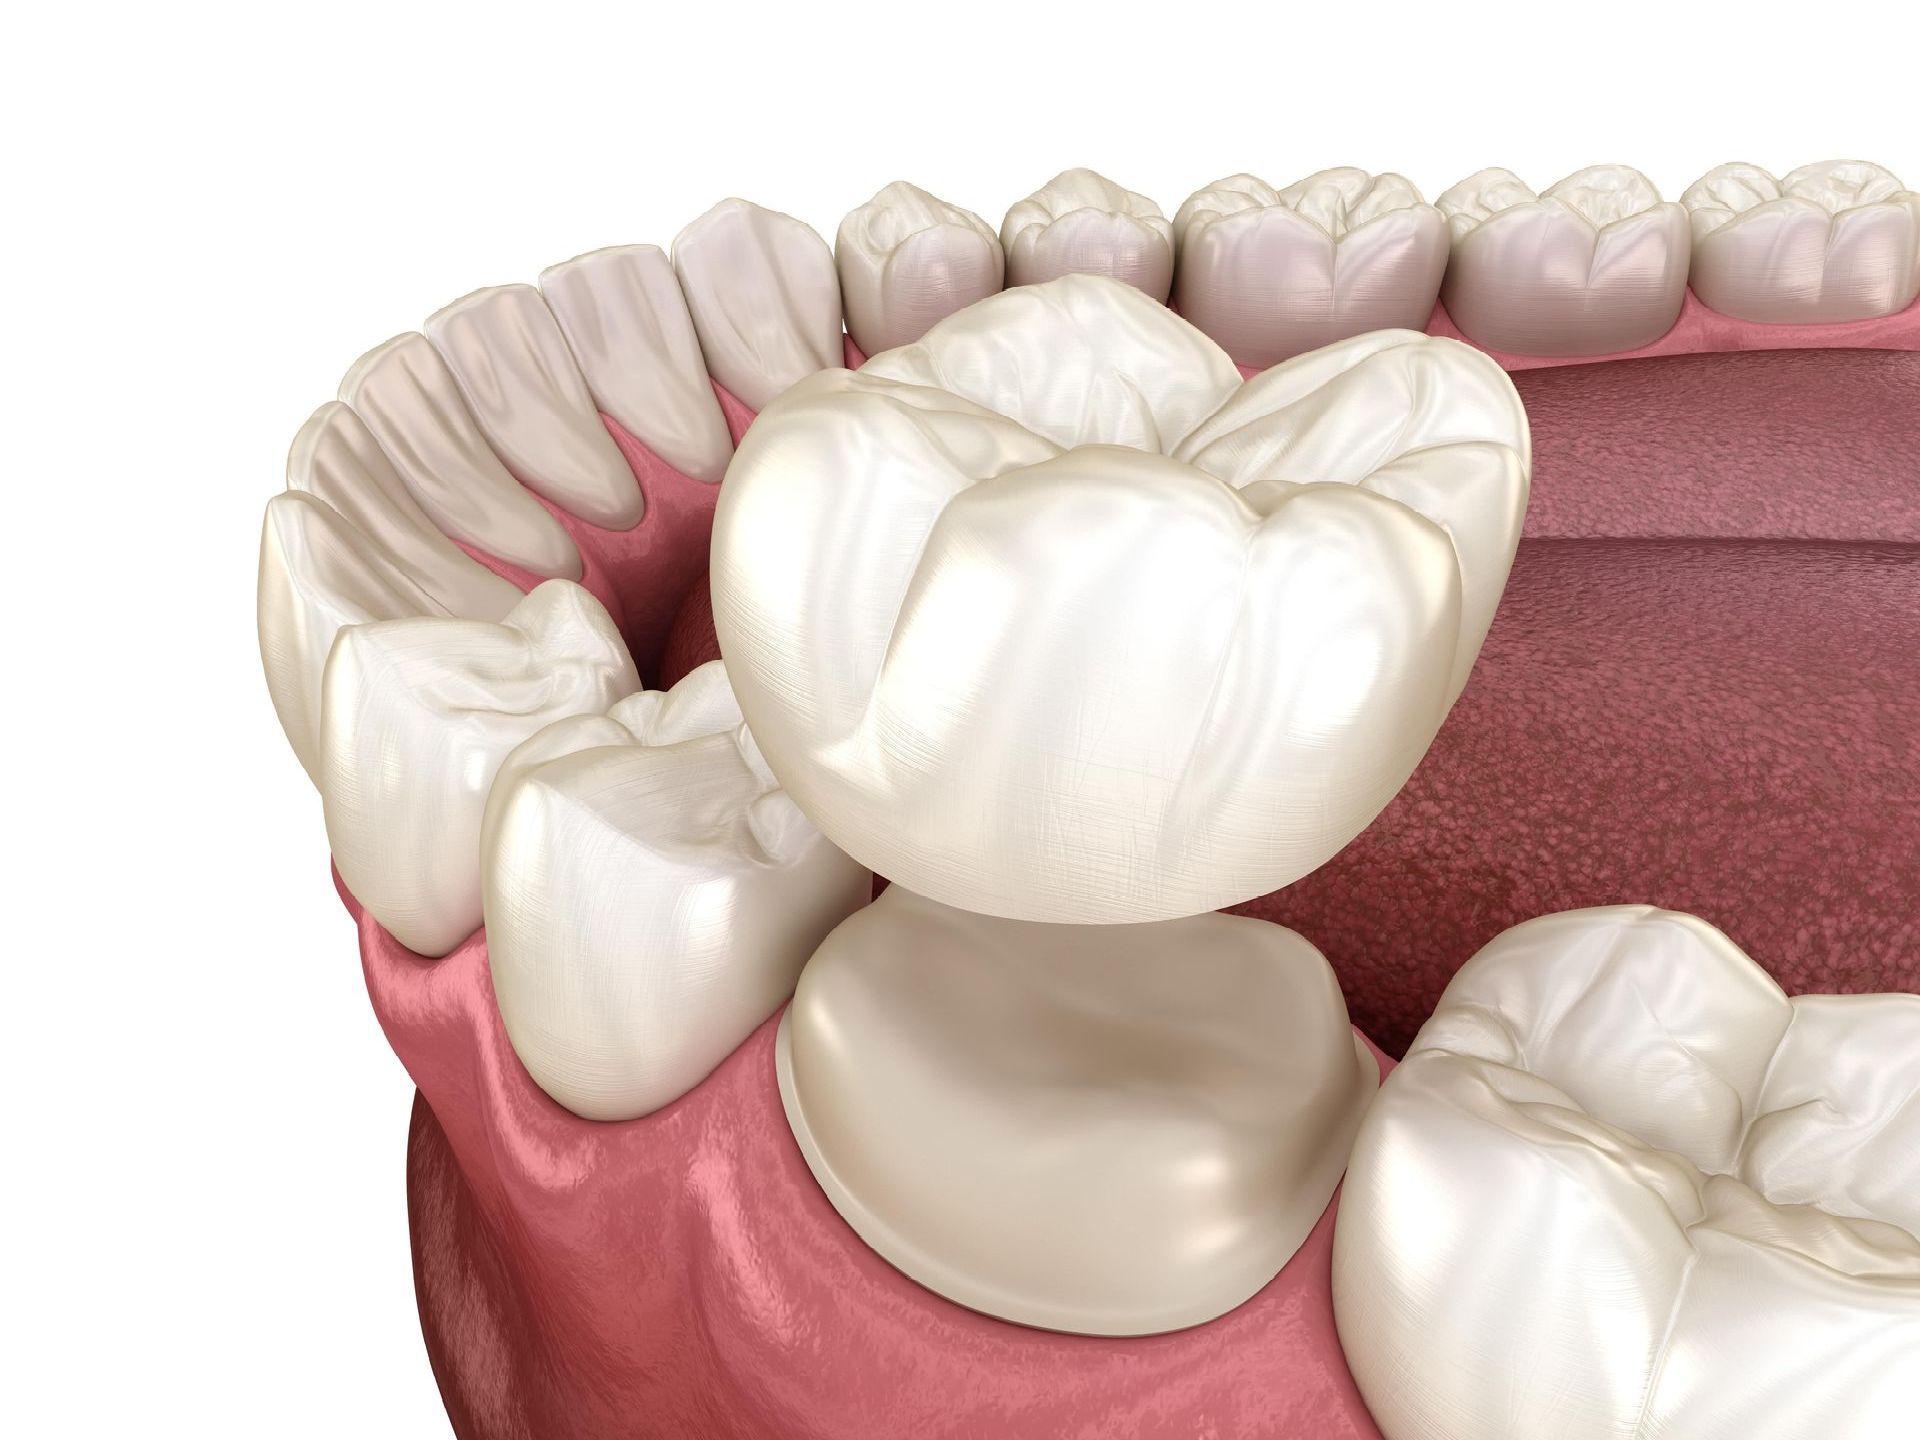 A computer generated image of a dental crown above a tooth